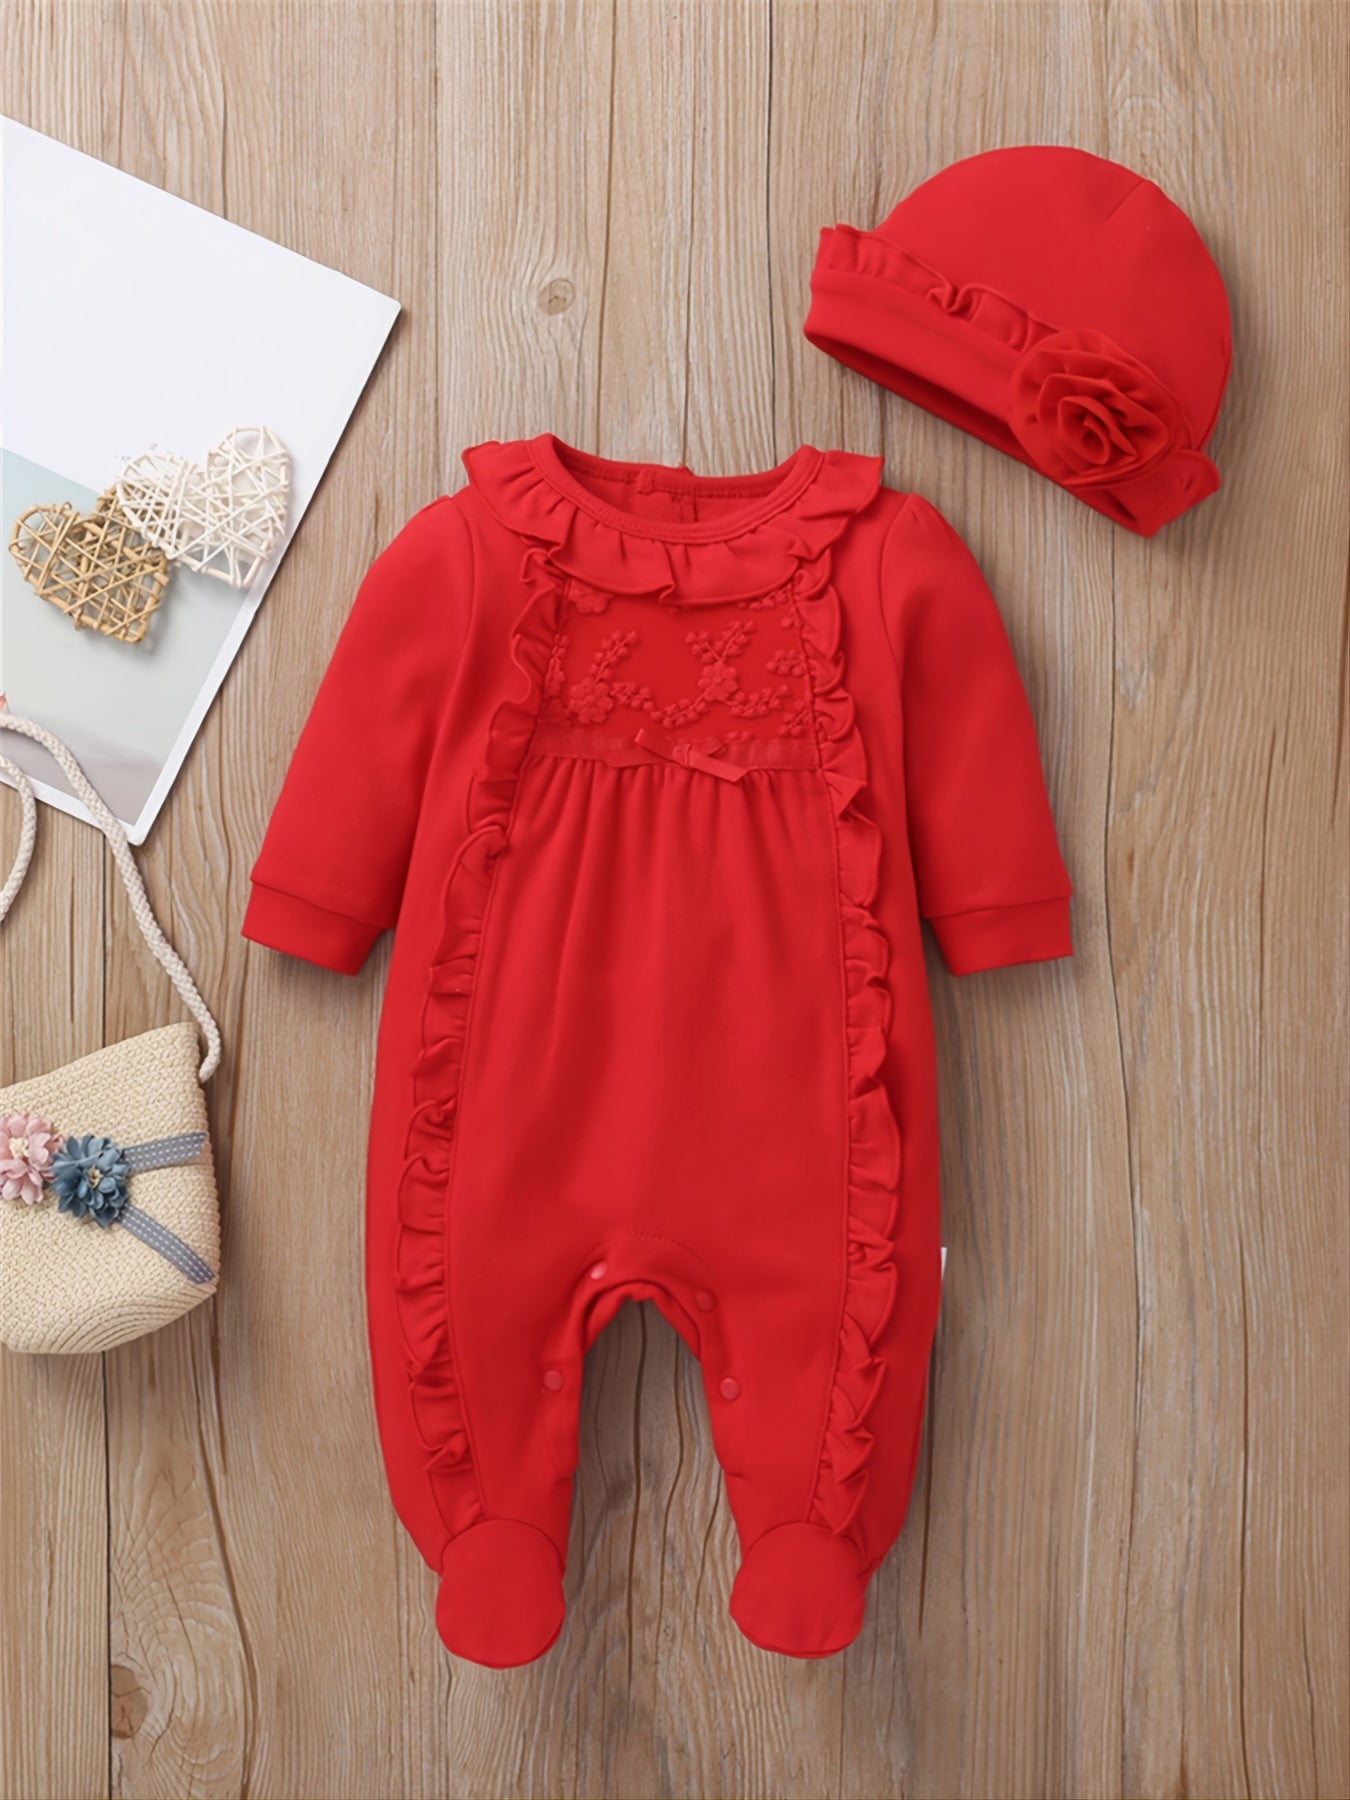 Baby Lace Bow Decor Footed Jumpsuit Baby Clothes